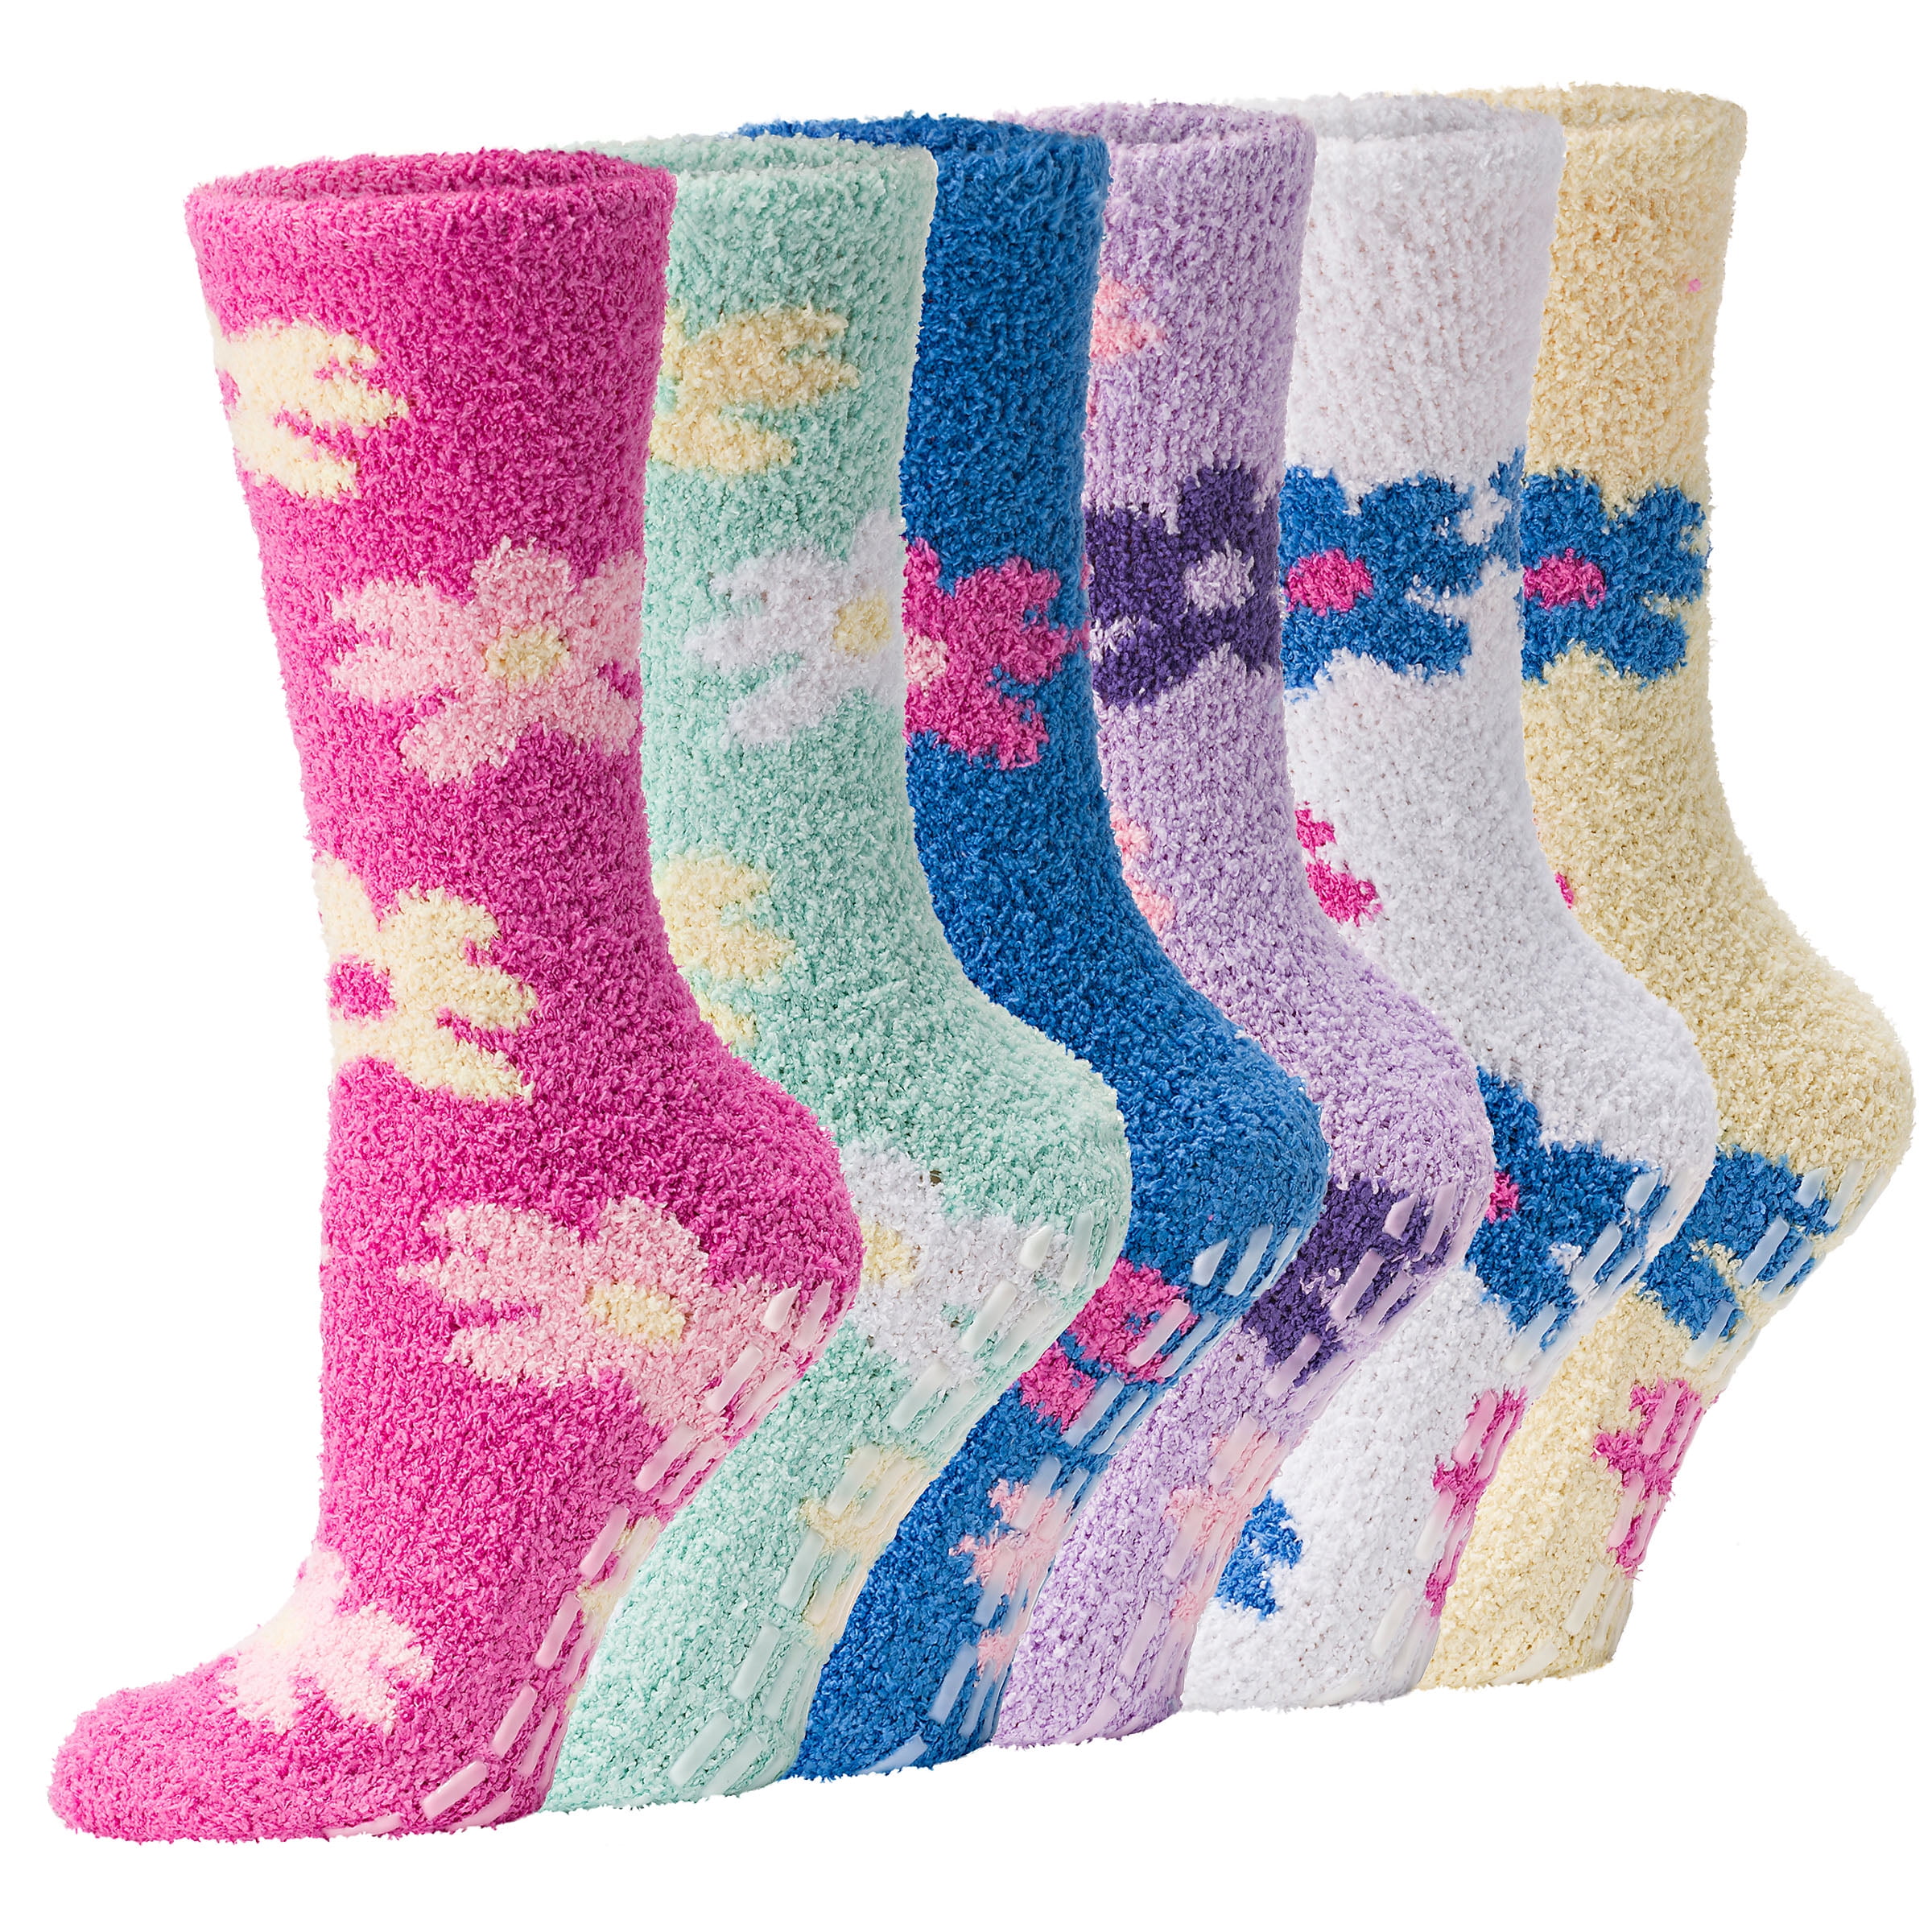 Ladies Non Skid Winter Socks for Woman 6 Pairs Womens Fuzzy Socks with Grips 